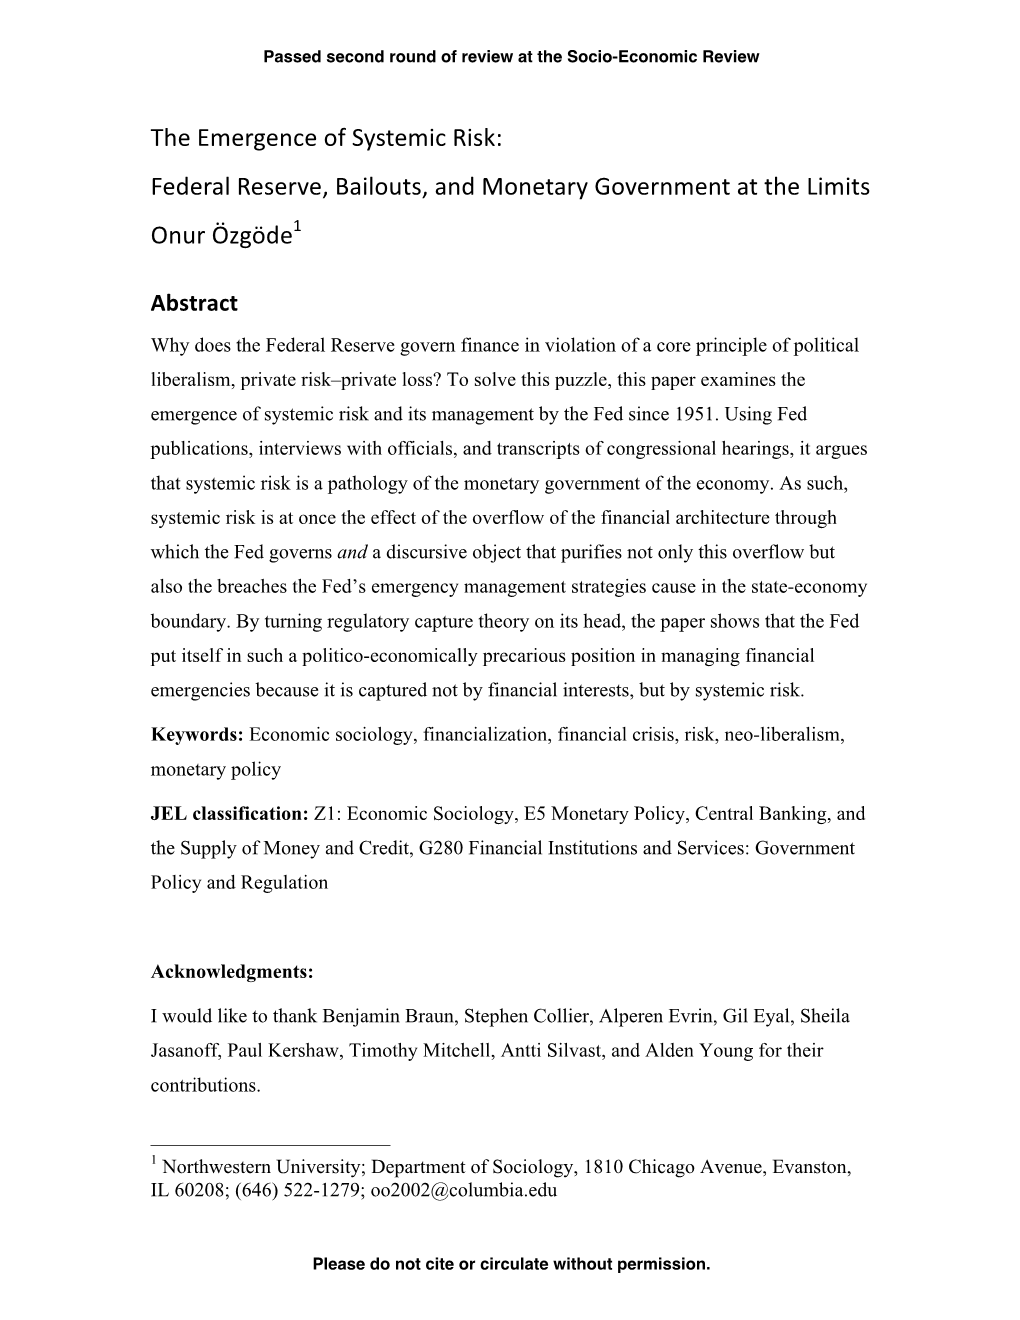 The Emergence of Systemic Risk: Federal Reserve, Bailouts, and Monetary Government at the Limits Onur Özgöde1